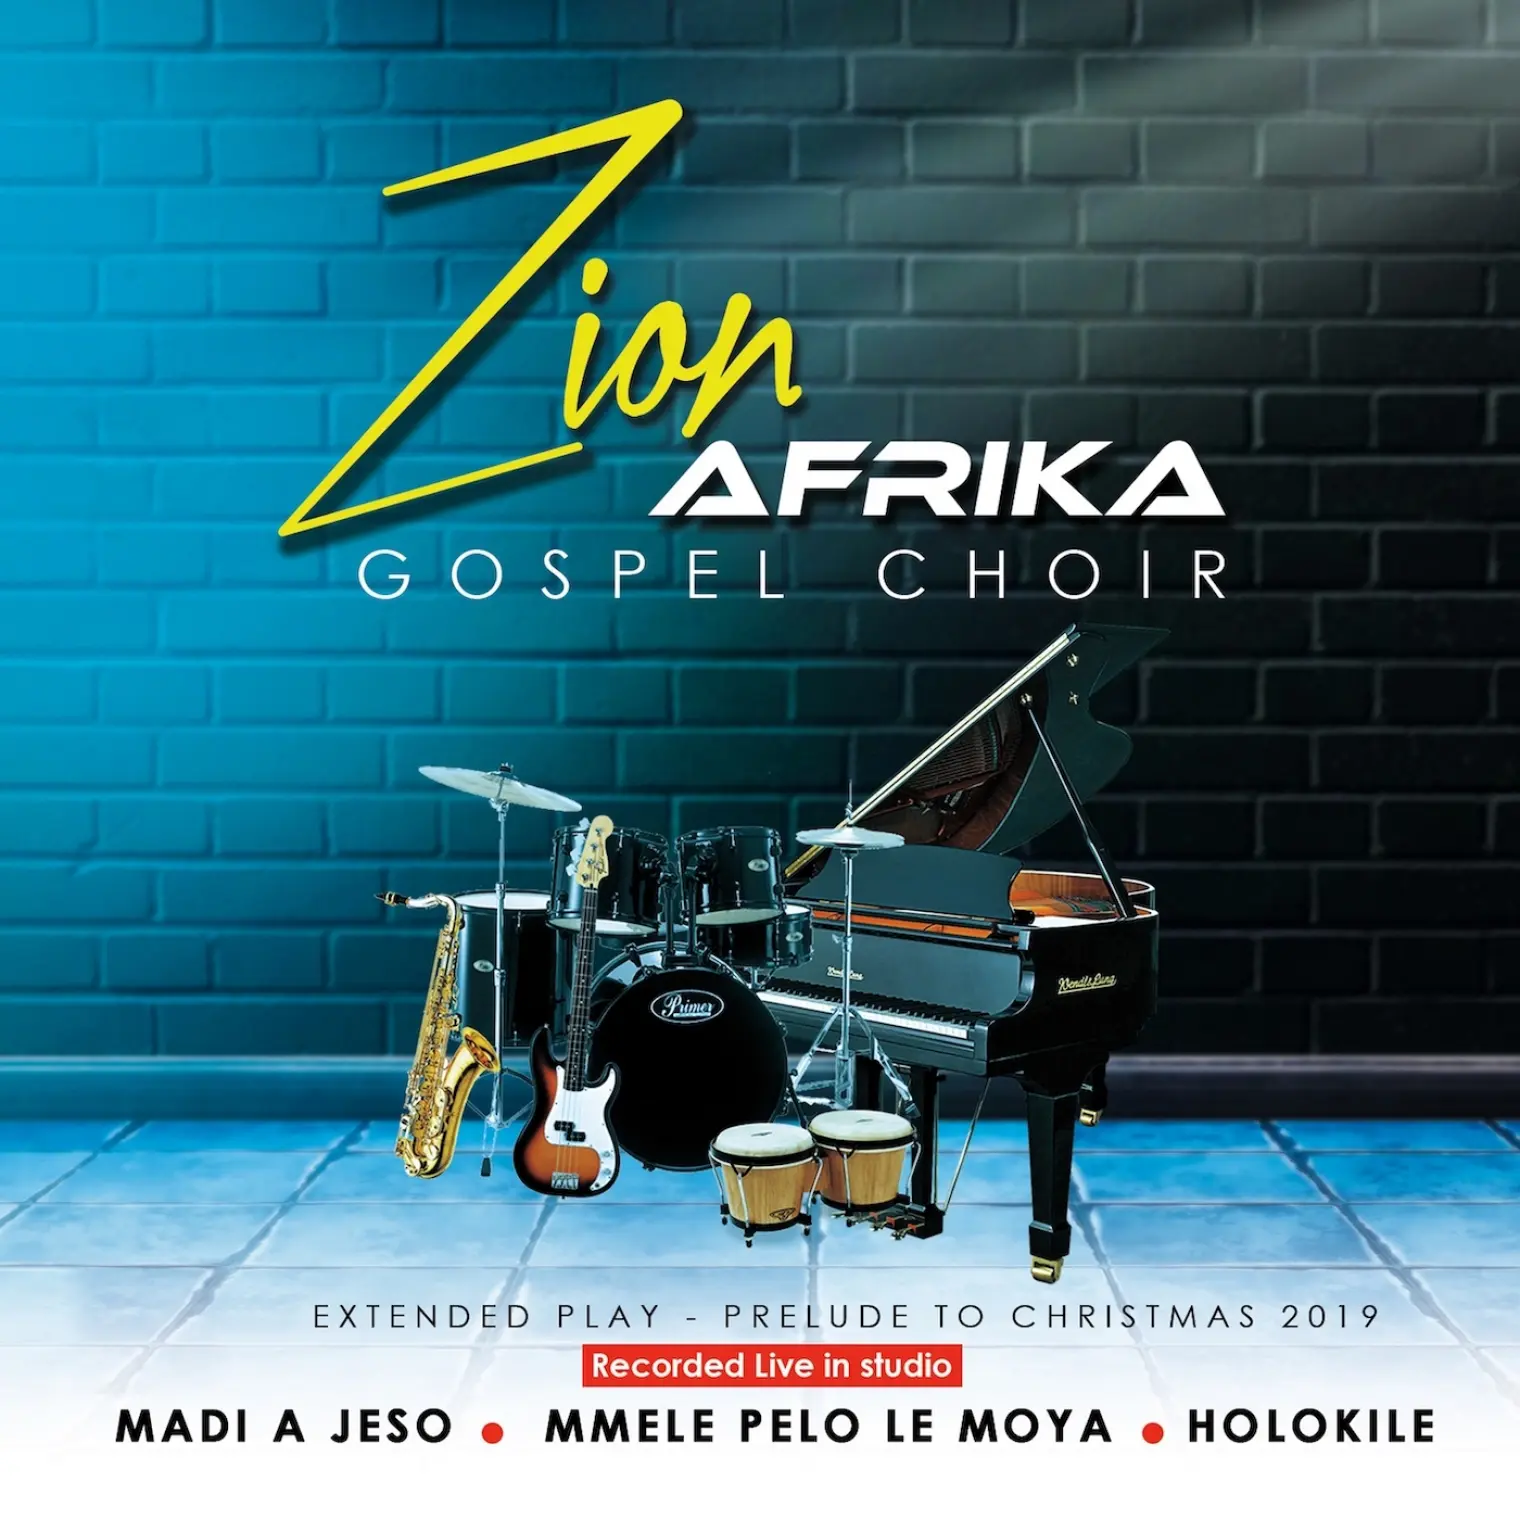 Extended Play Prelude To Christmas -  Zion Afrika 